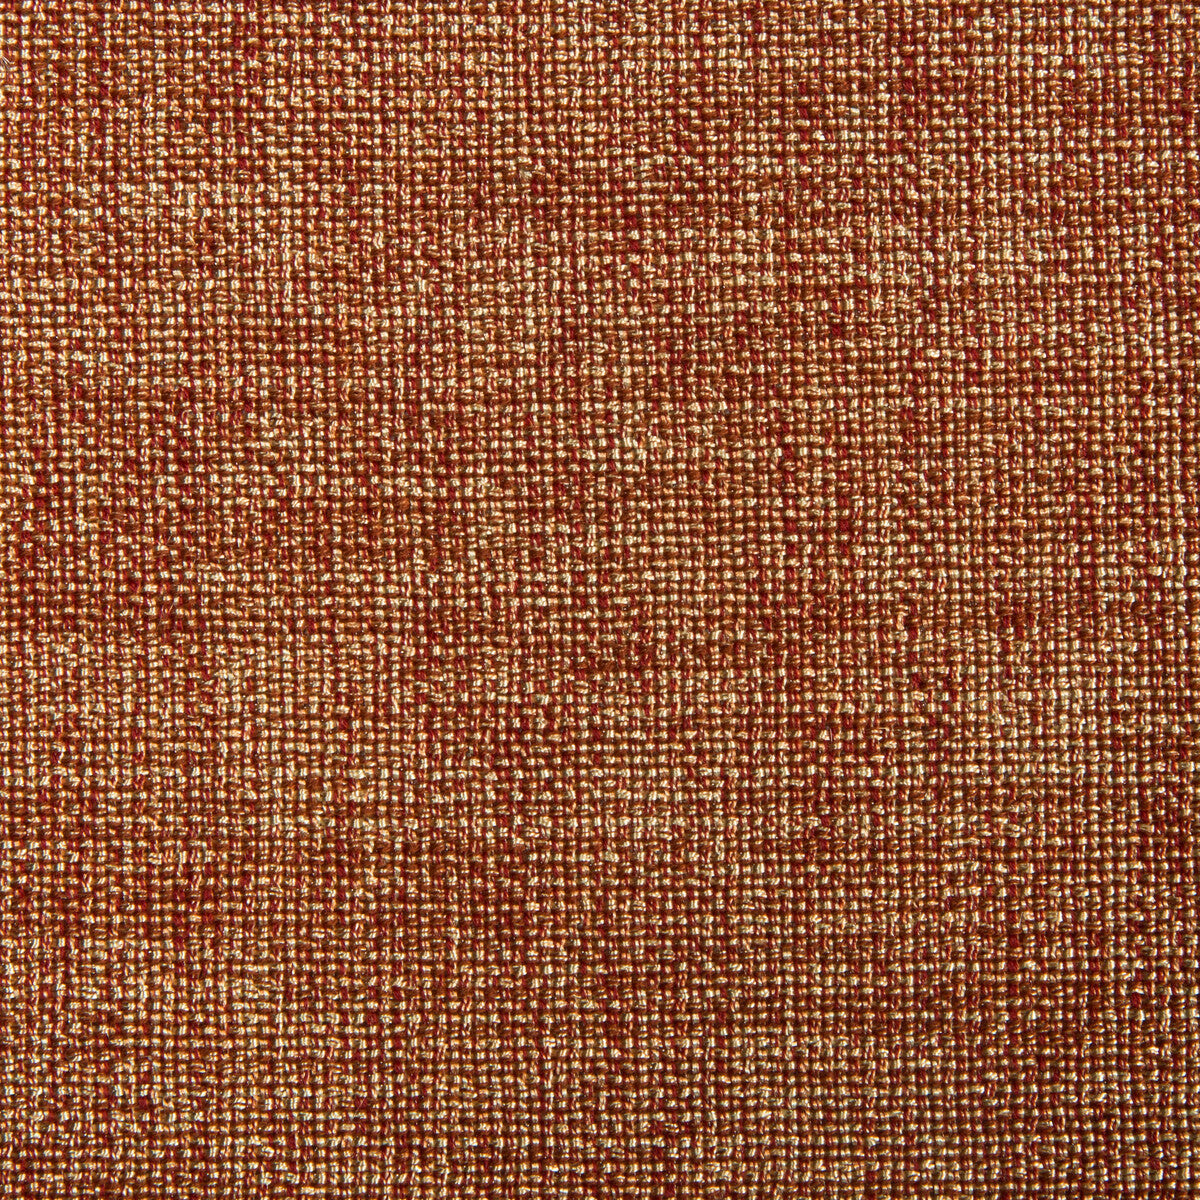 Kravet Contract fabric in 4458-24 color - pattern 4458.24.0 - by Kravet Contract